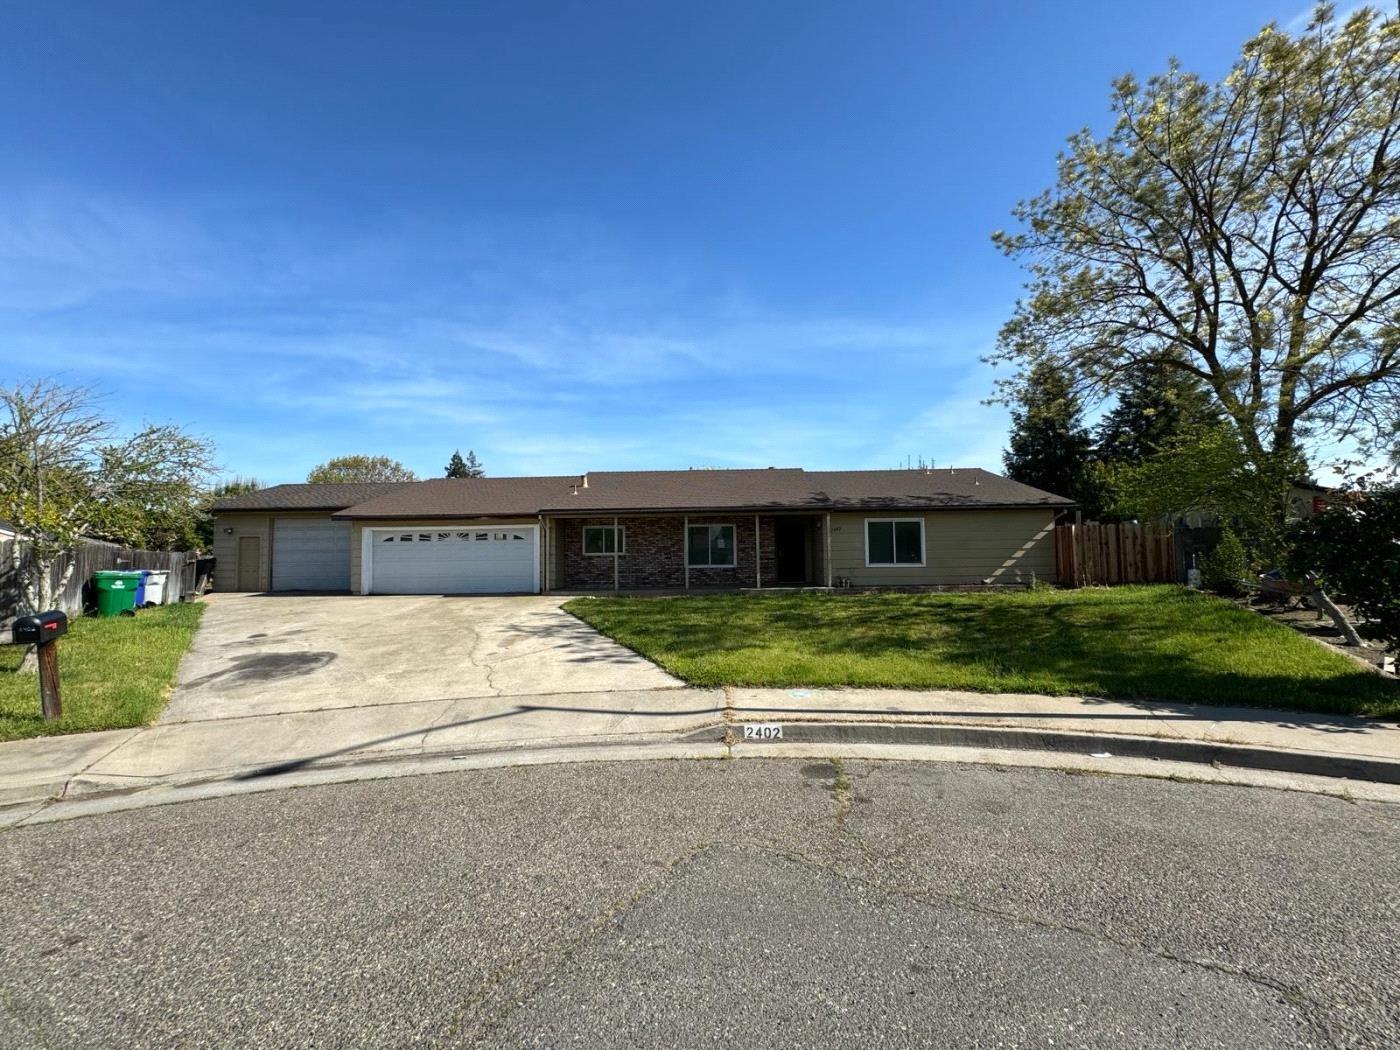 2402 Summertime Ct, Atwater, CA, 95301